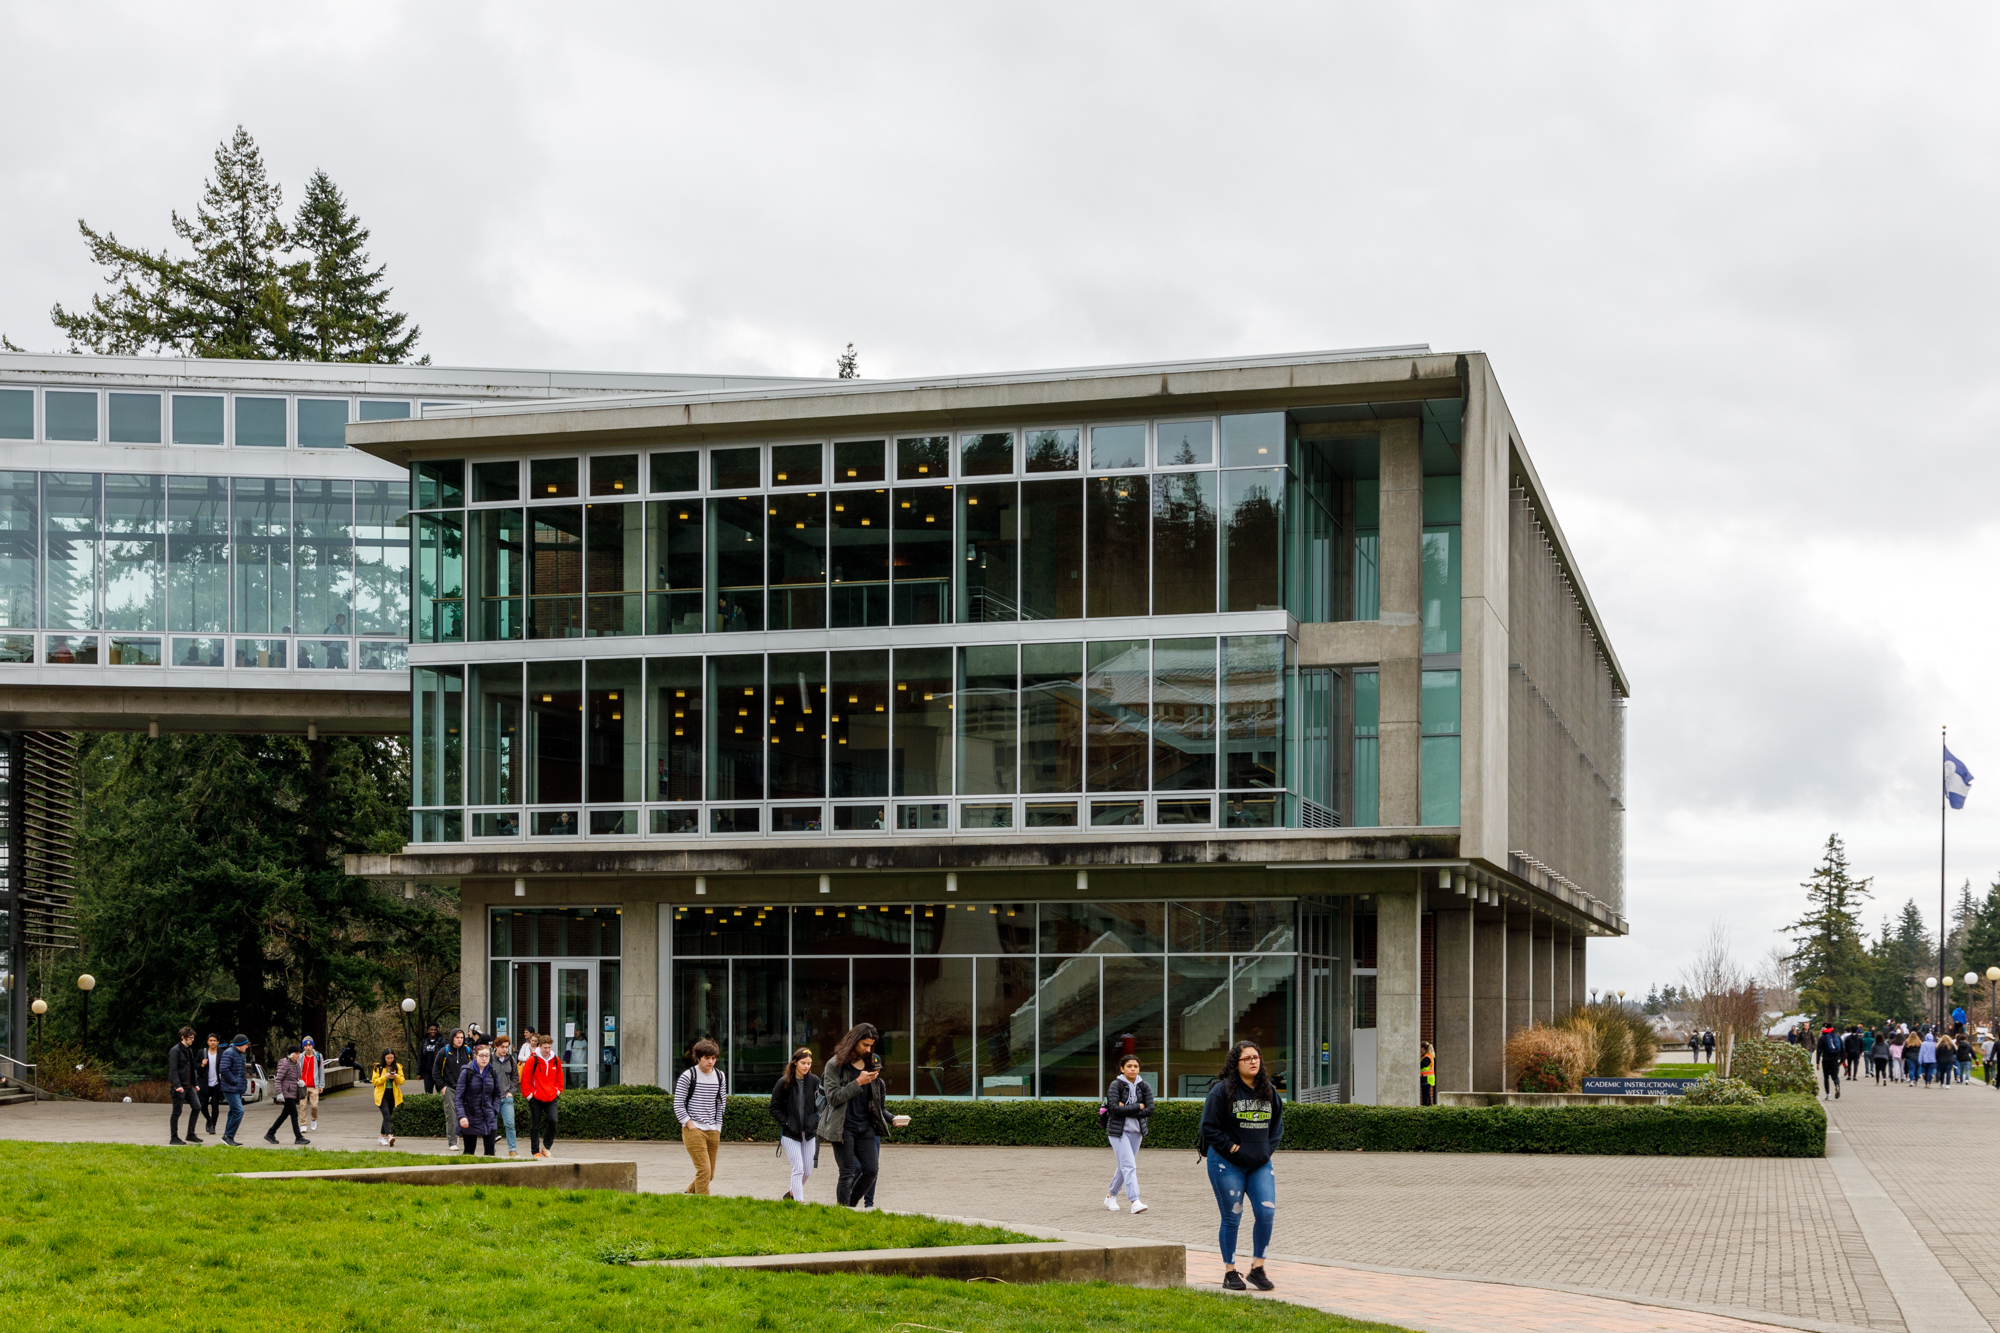 Image of the exterior view of the Academic West building.